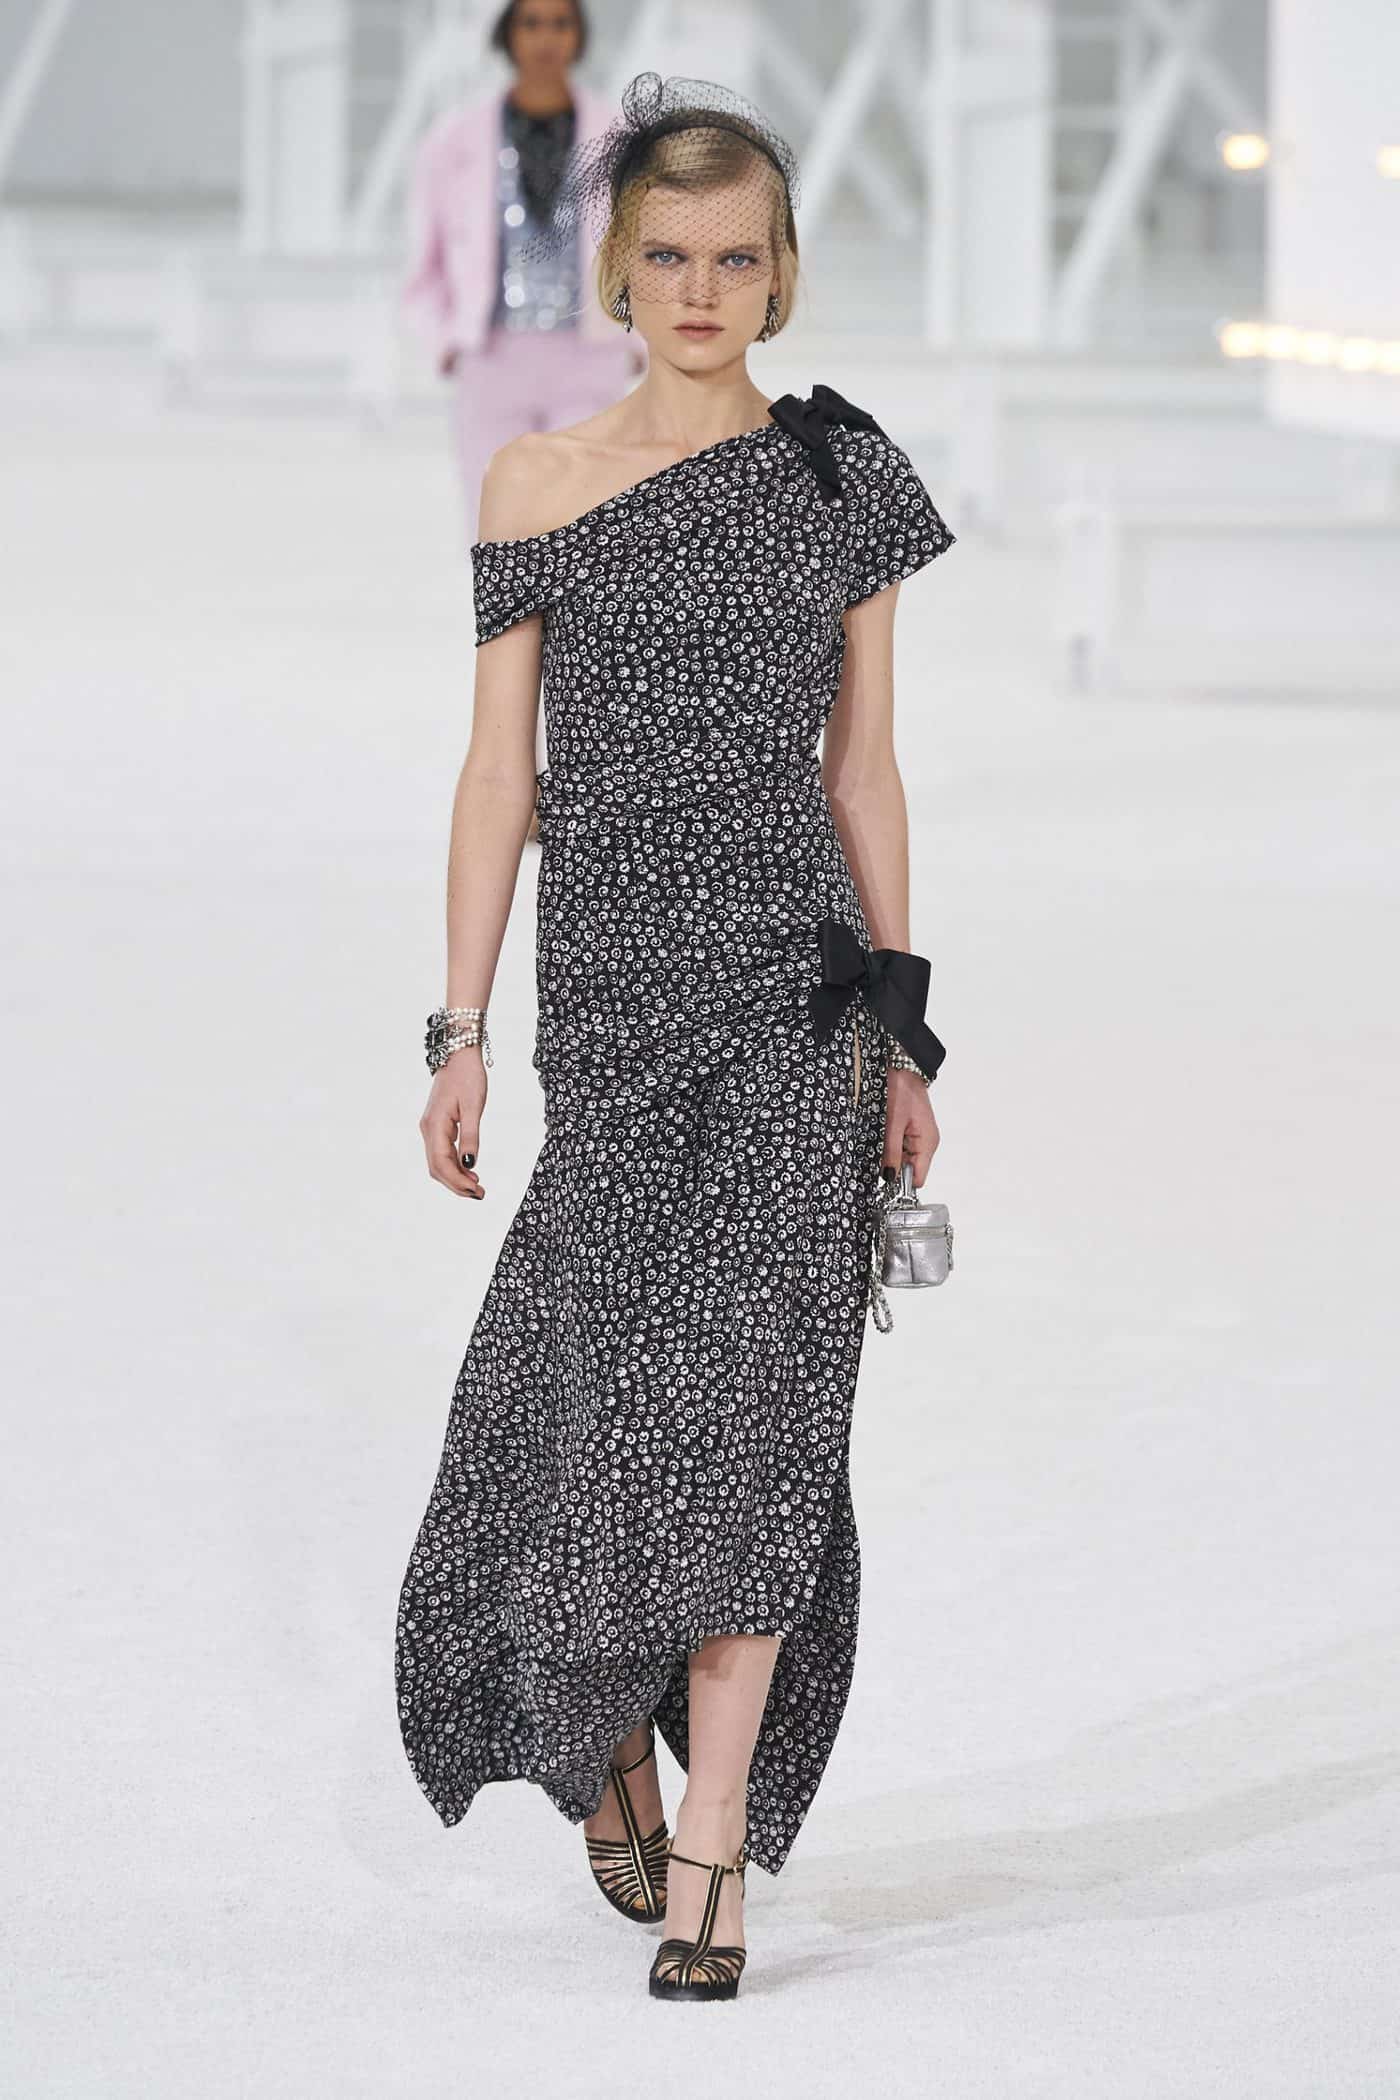 Chanel Takes Us To Tinseltown For SS '21 - Daily Front Row